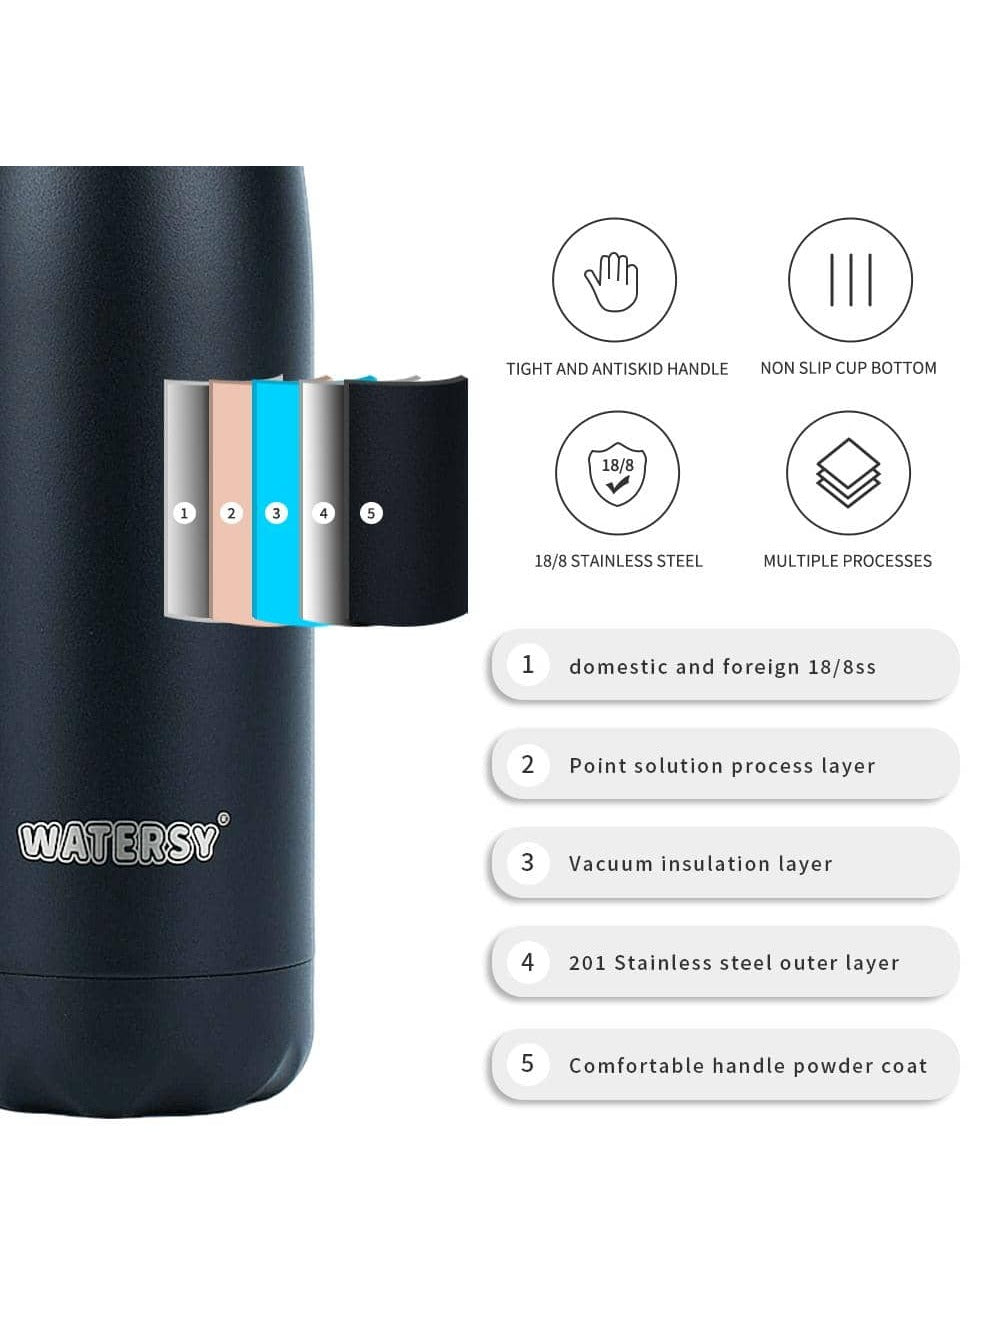 Watersy Triple-Insulated Stainless Steel Water Bottle (Black) 17oz/500ml, Keeps Hot and Cold, 100% Leakproof Lids, Sweatproof Water Bottles, Great for Travel, Picnic& Camping